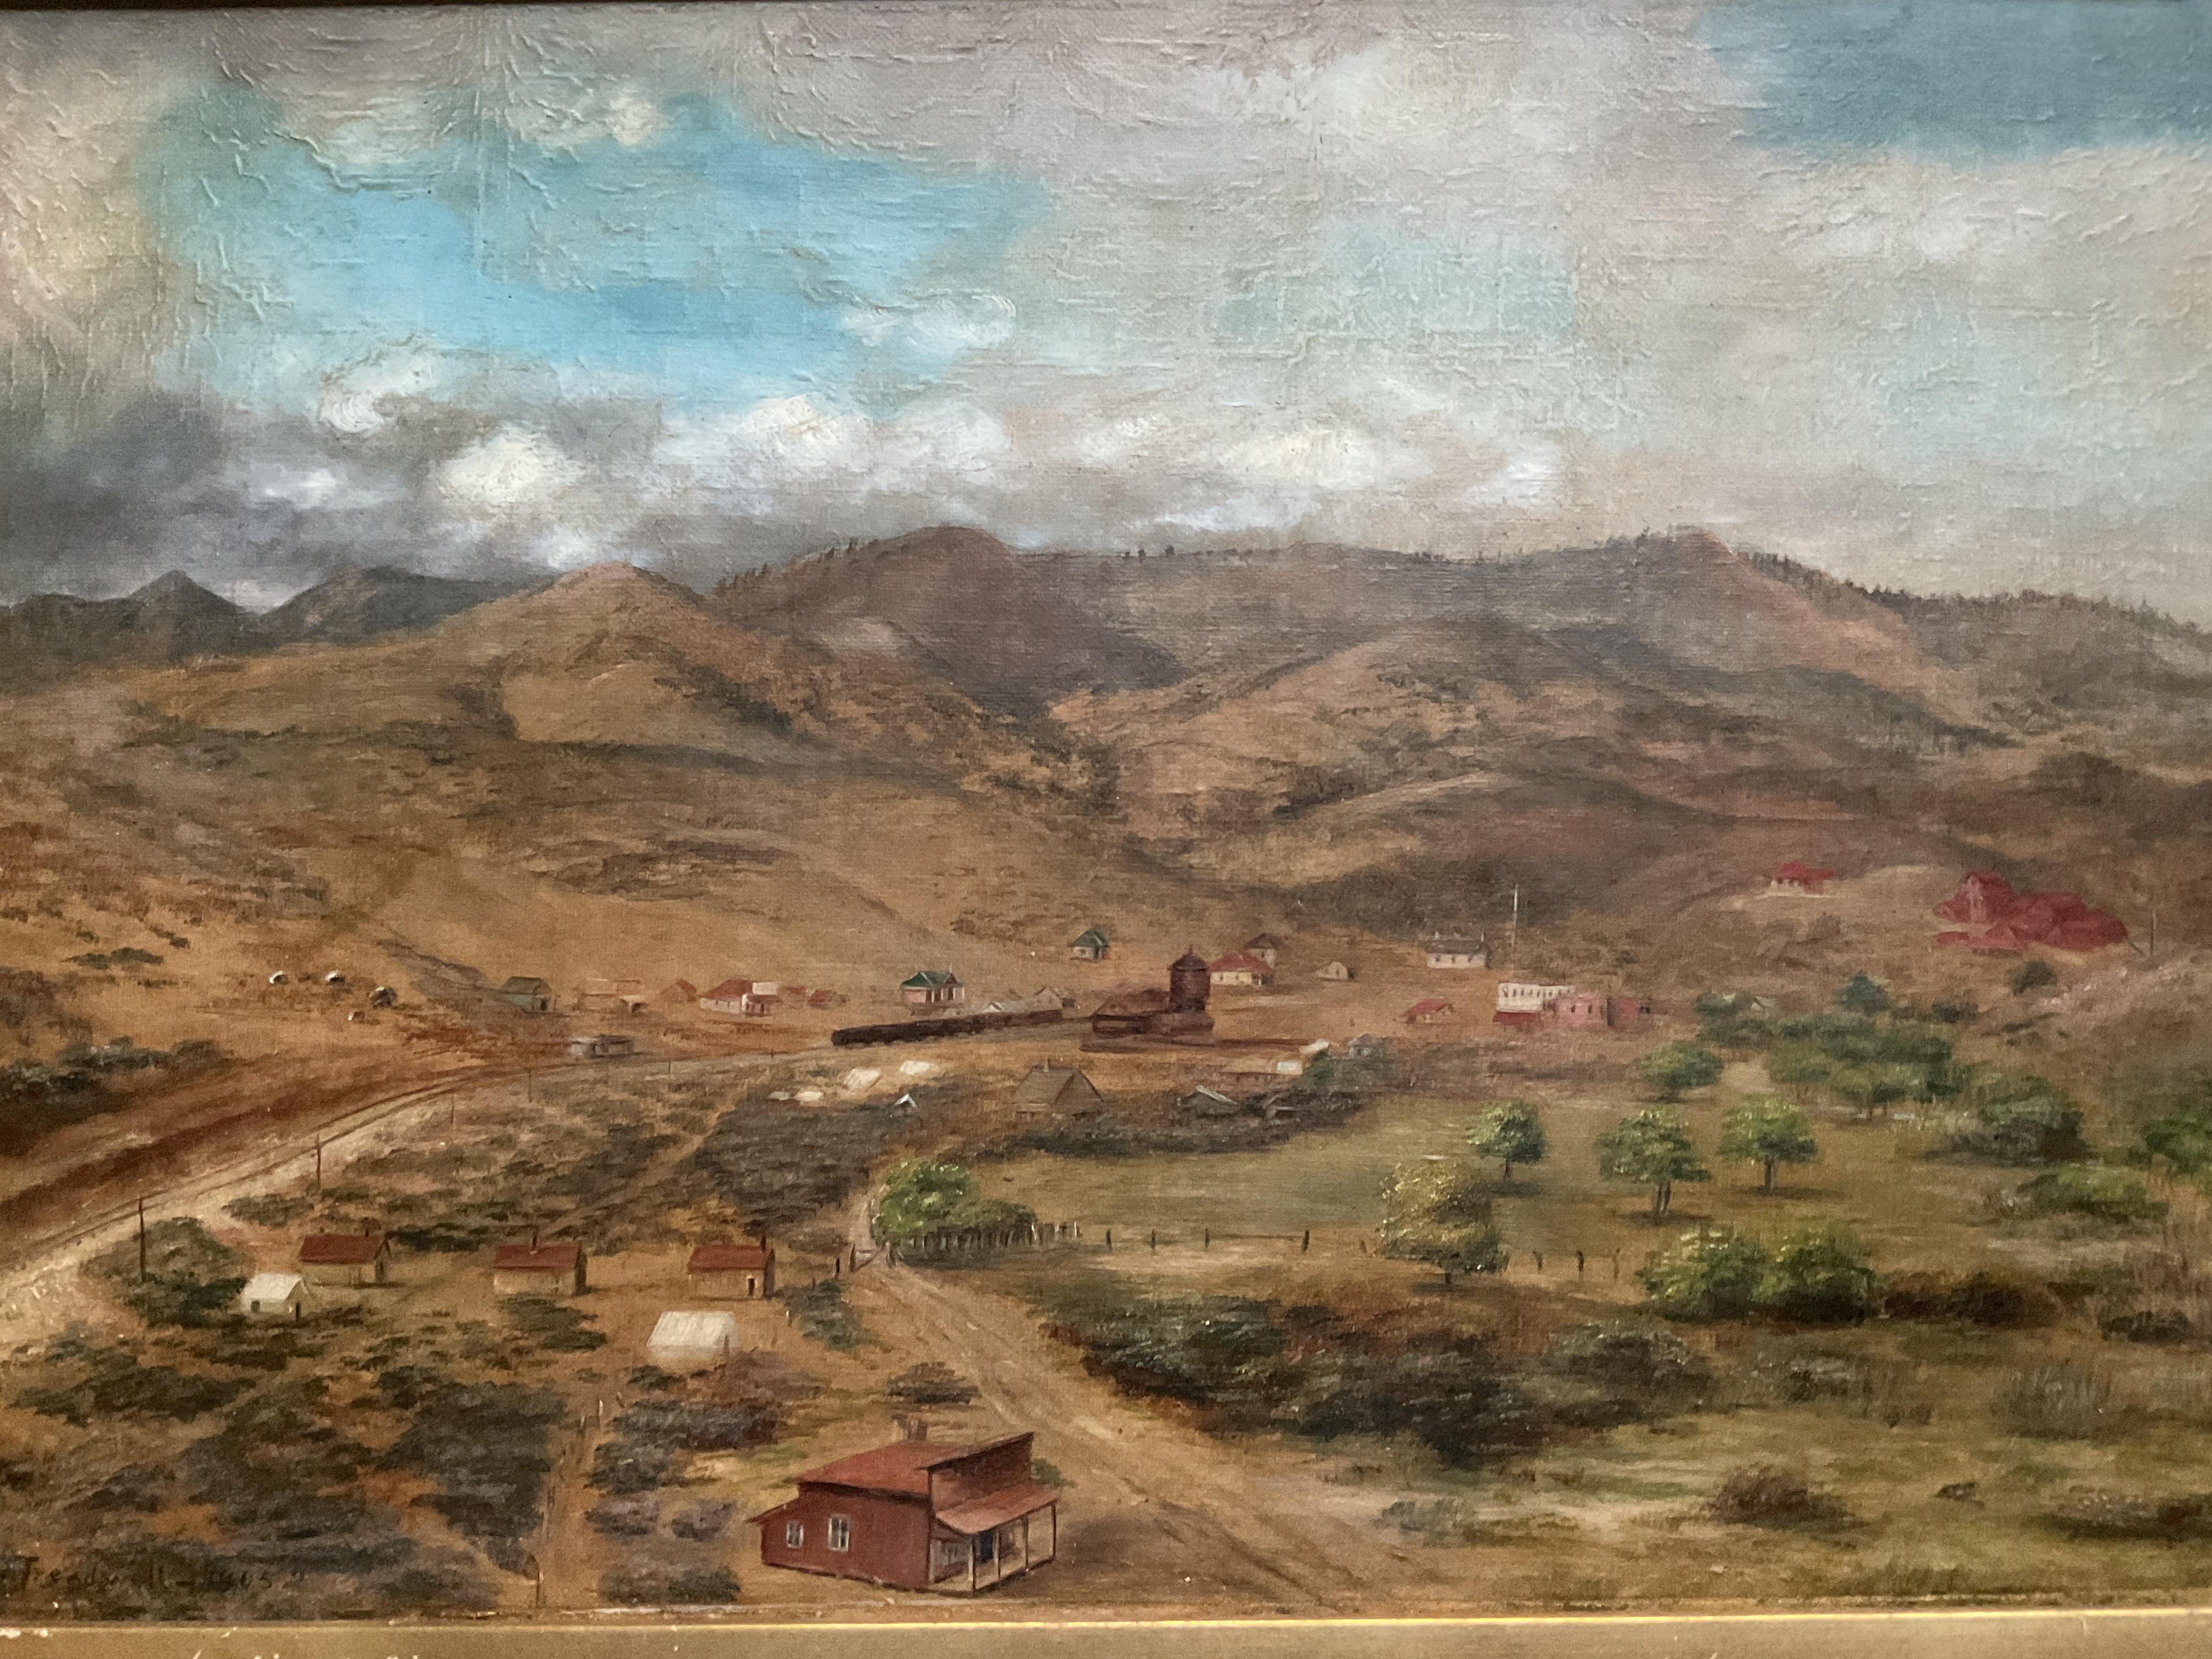 Rare California or Western Mining Town Oil Painting by Listed Artist M Treadwell - Brown Landscape Painting by Minerva Treadwell